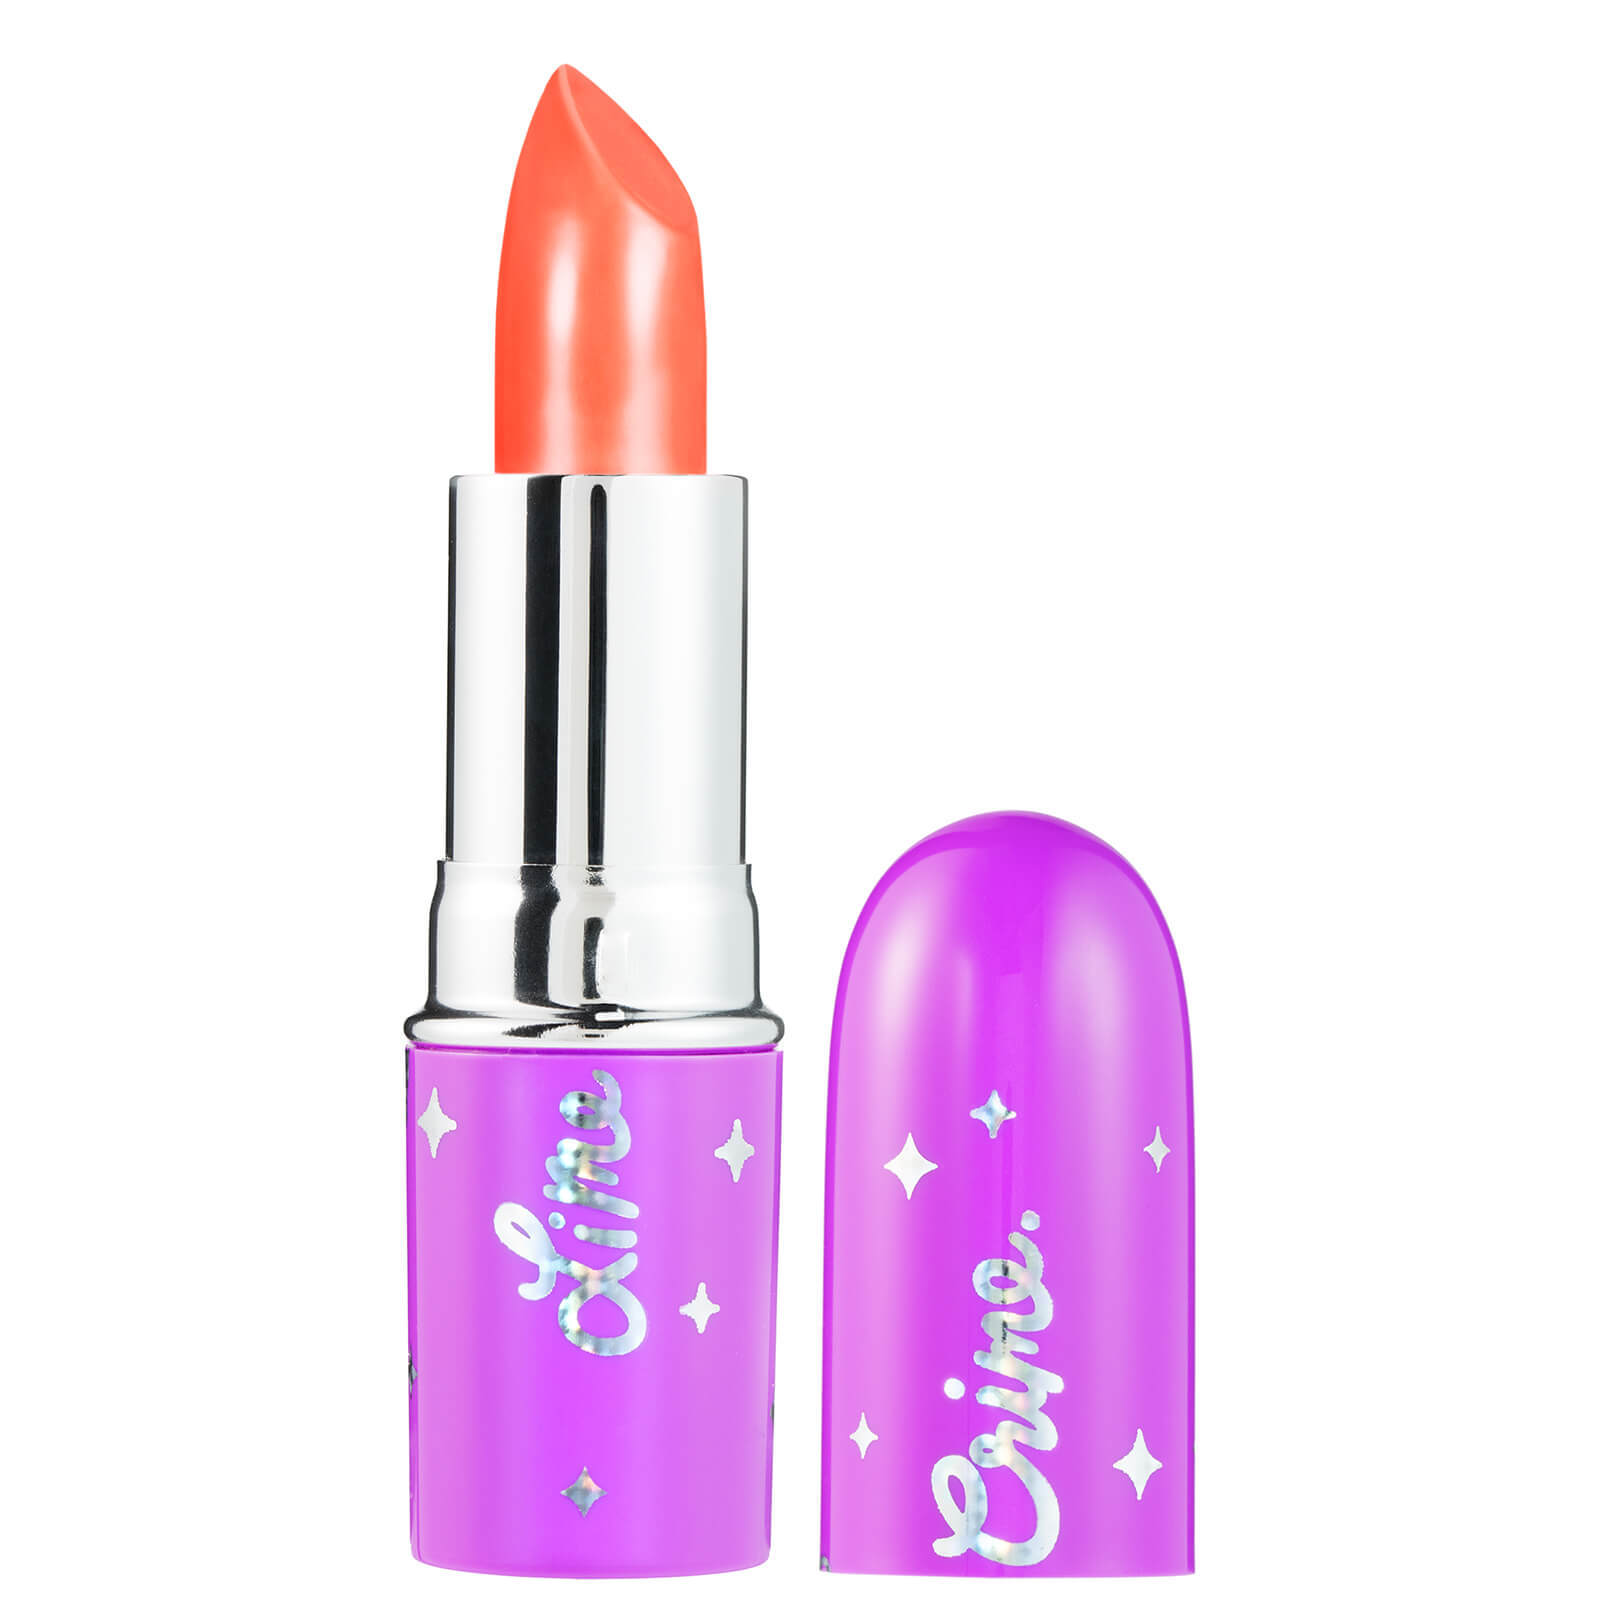 Lime Crime Unicorn Lipstick Not Another Peach